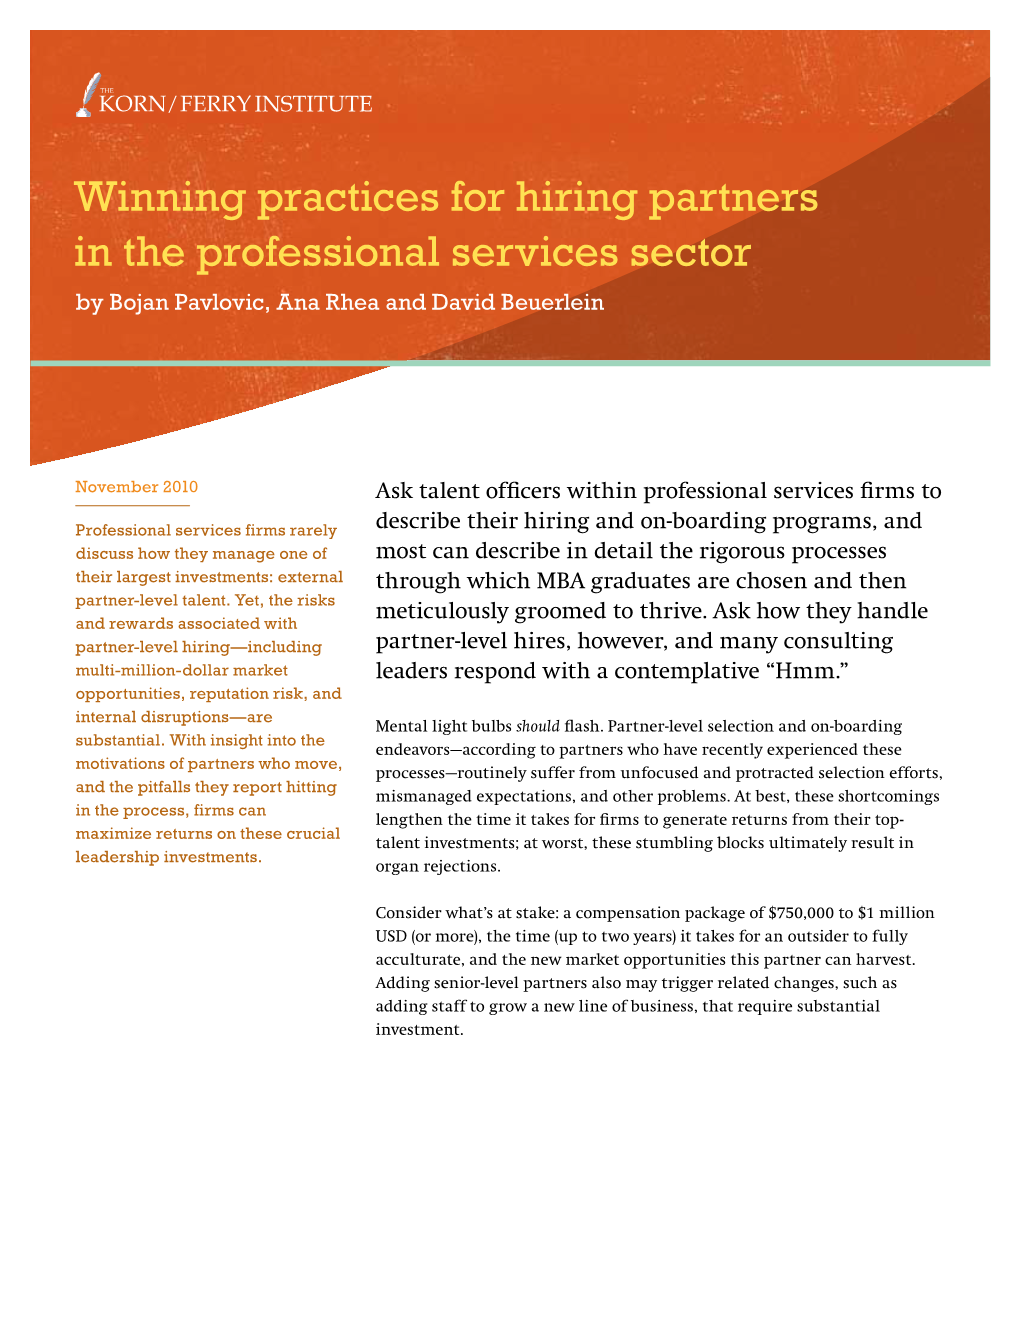 Winning Practices for Hiring Partners in the Professional Services Sector by Bojan Pavlovic, Ana Rhea and David Beuerlein